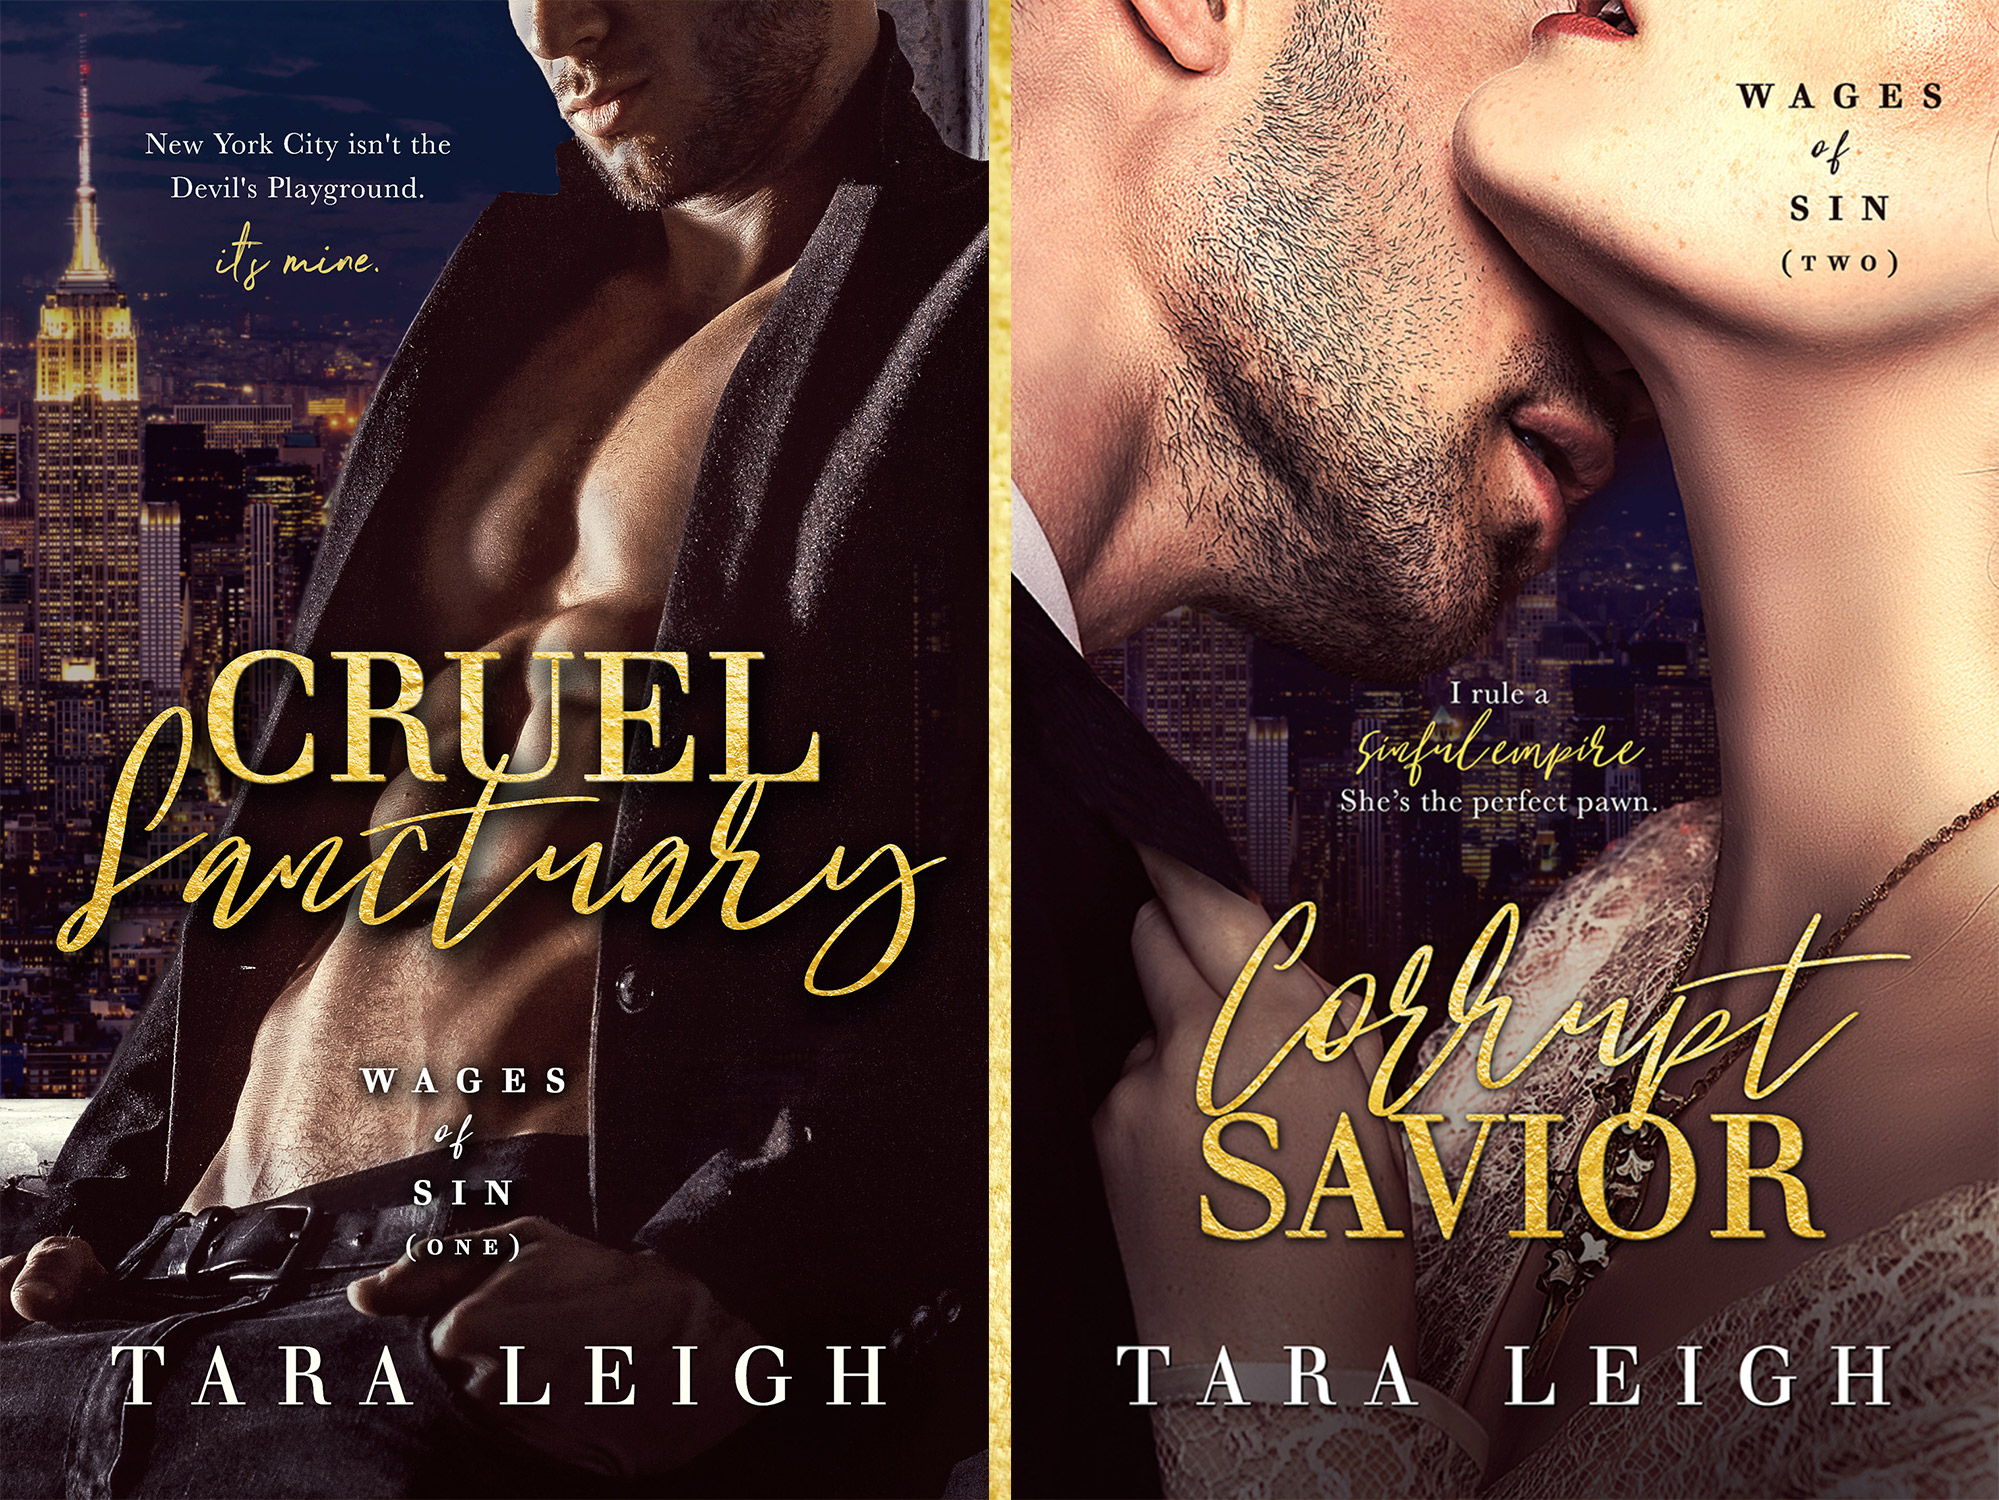 The Wages of Sin Duet: Cruel Sanctuary & Corrupt Savior by Tara Leigh [Cover Reveal]